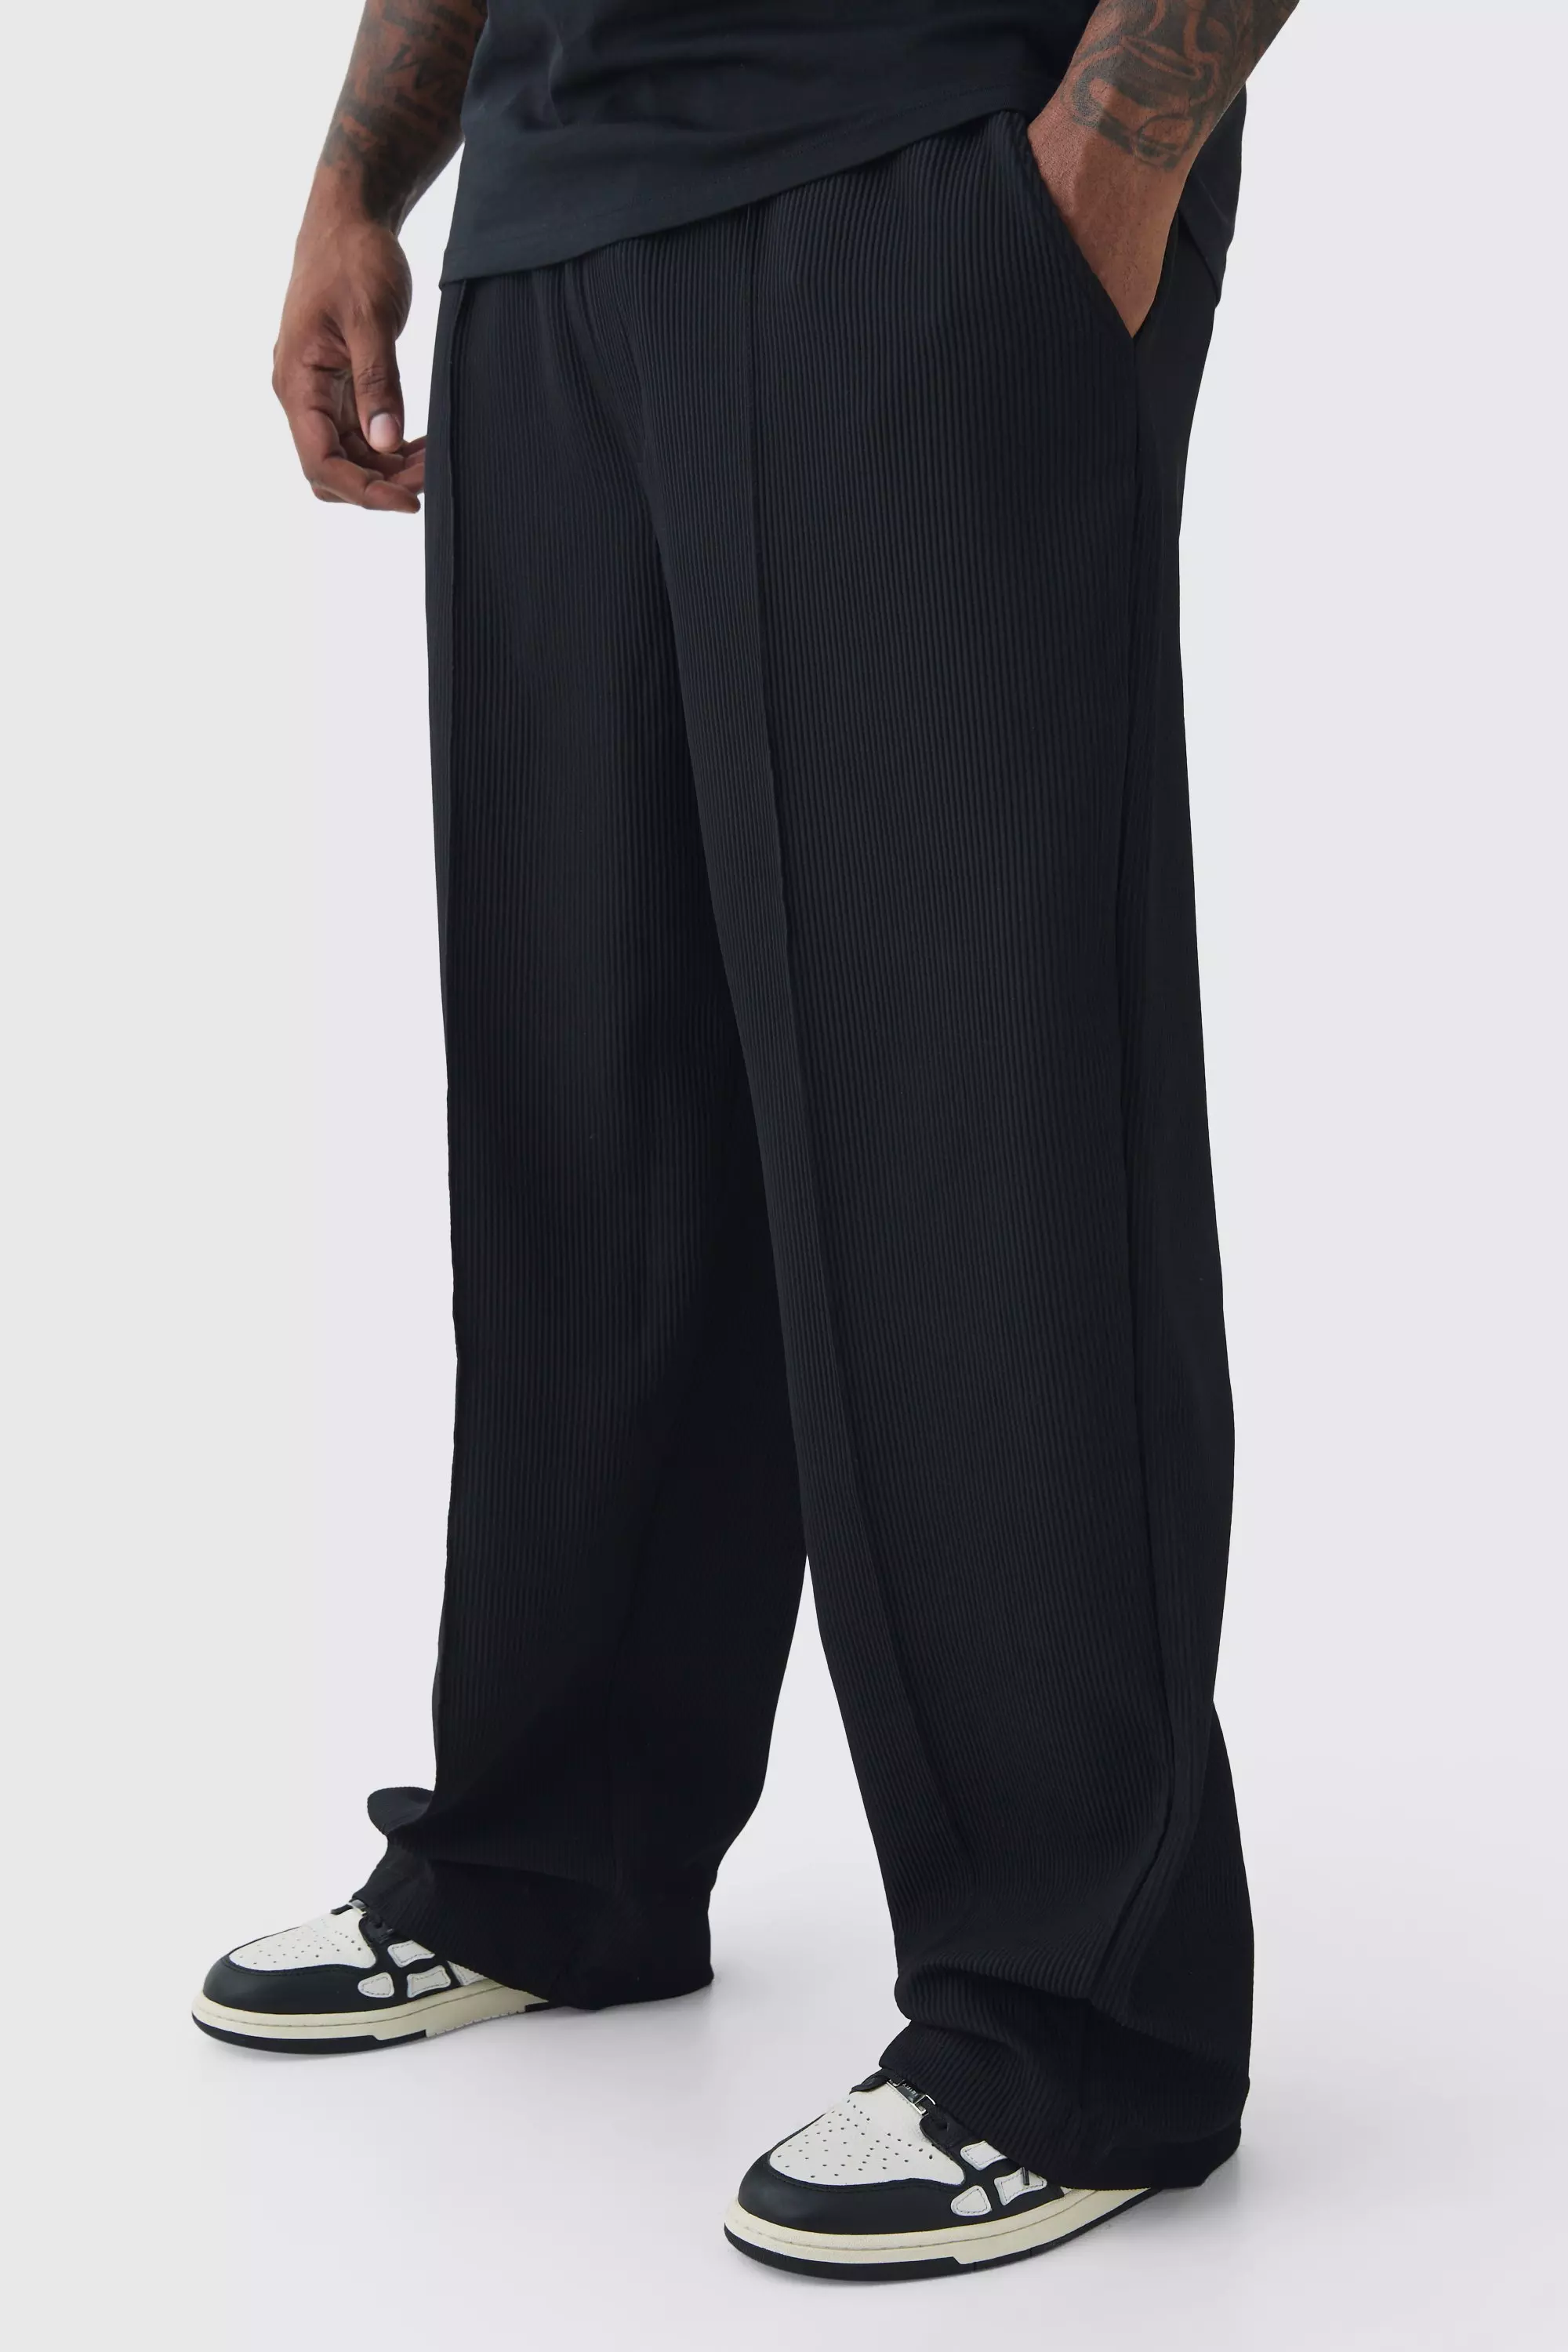 Plus Elastic Waist Relaxed Fit Pleated Pants | boohooMAN USA